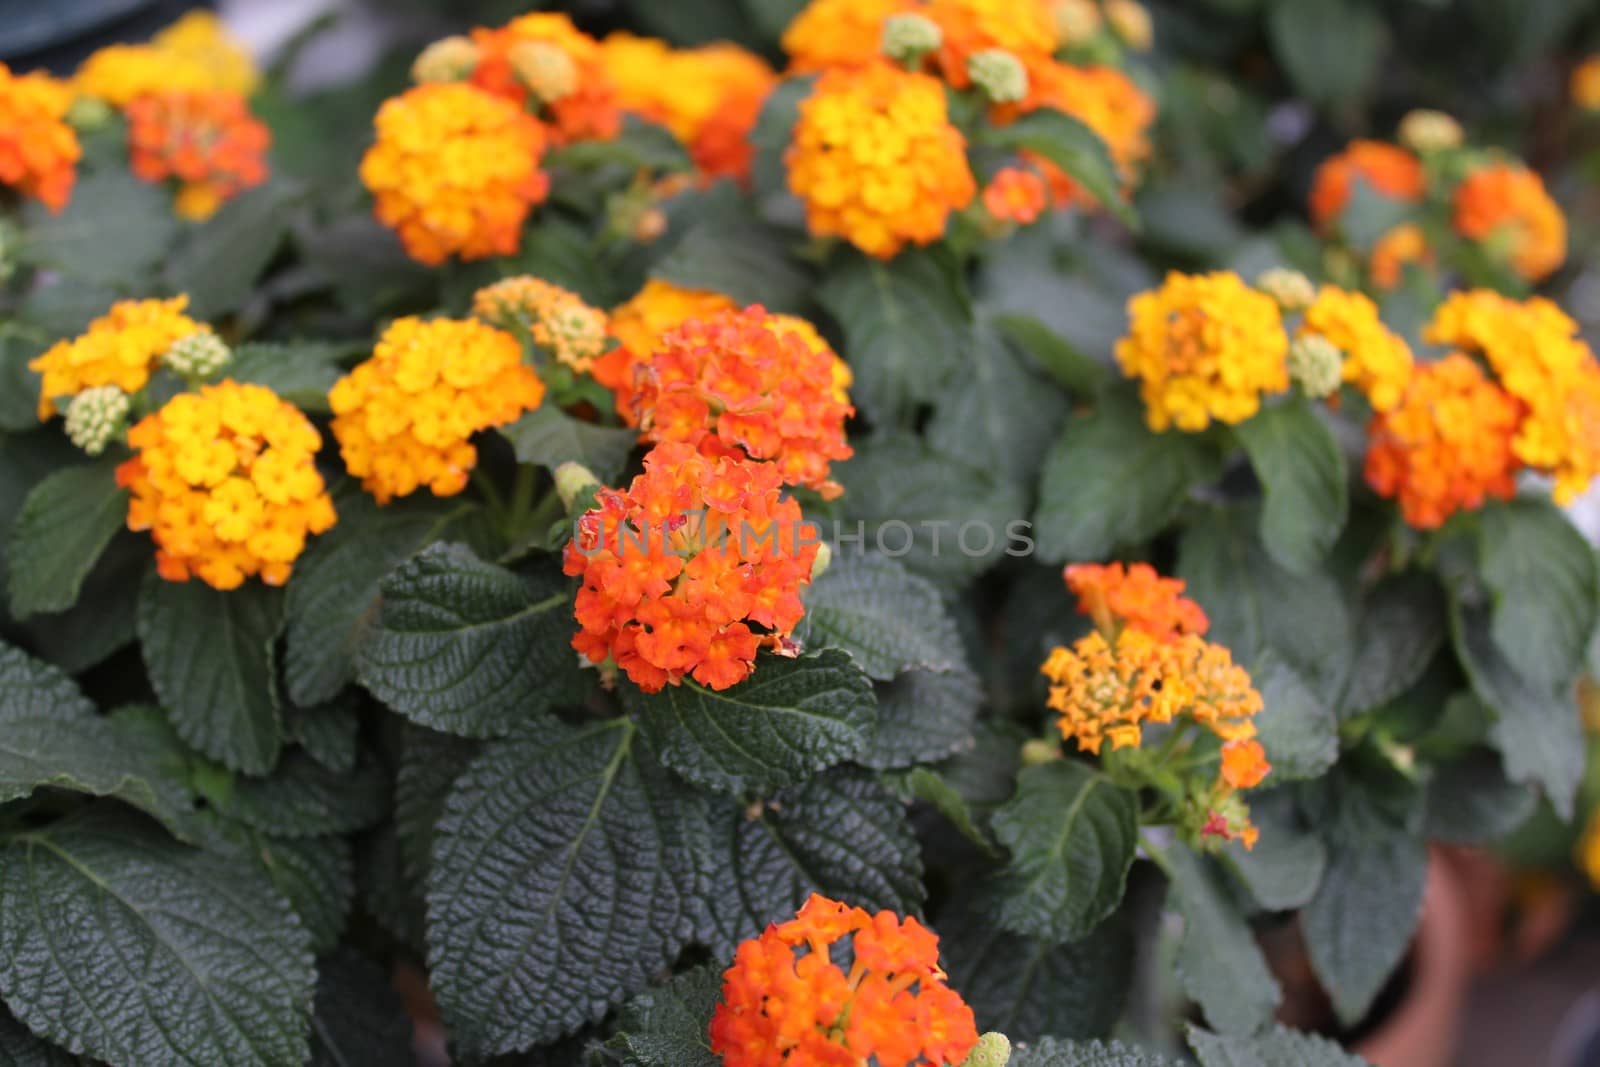 The picture shows beautiful lantana in the garden